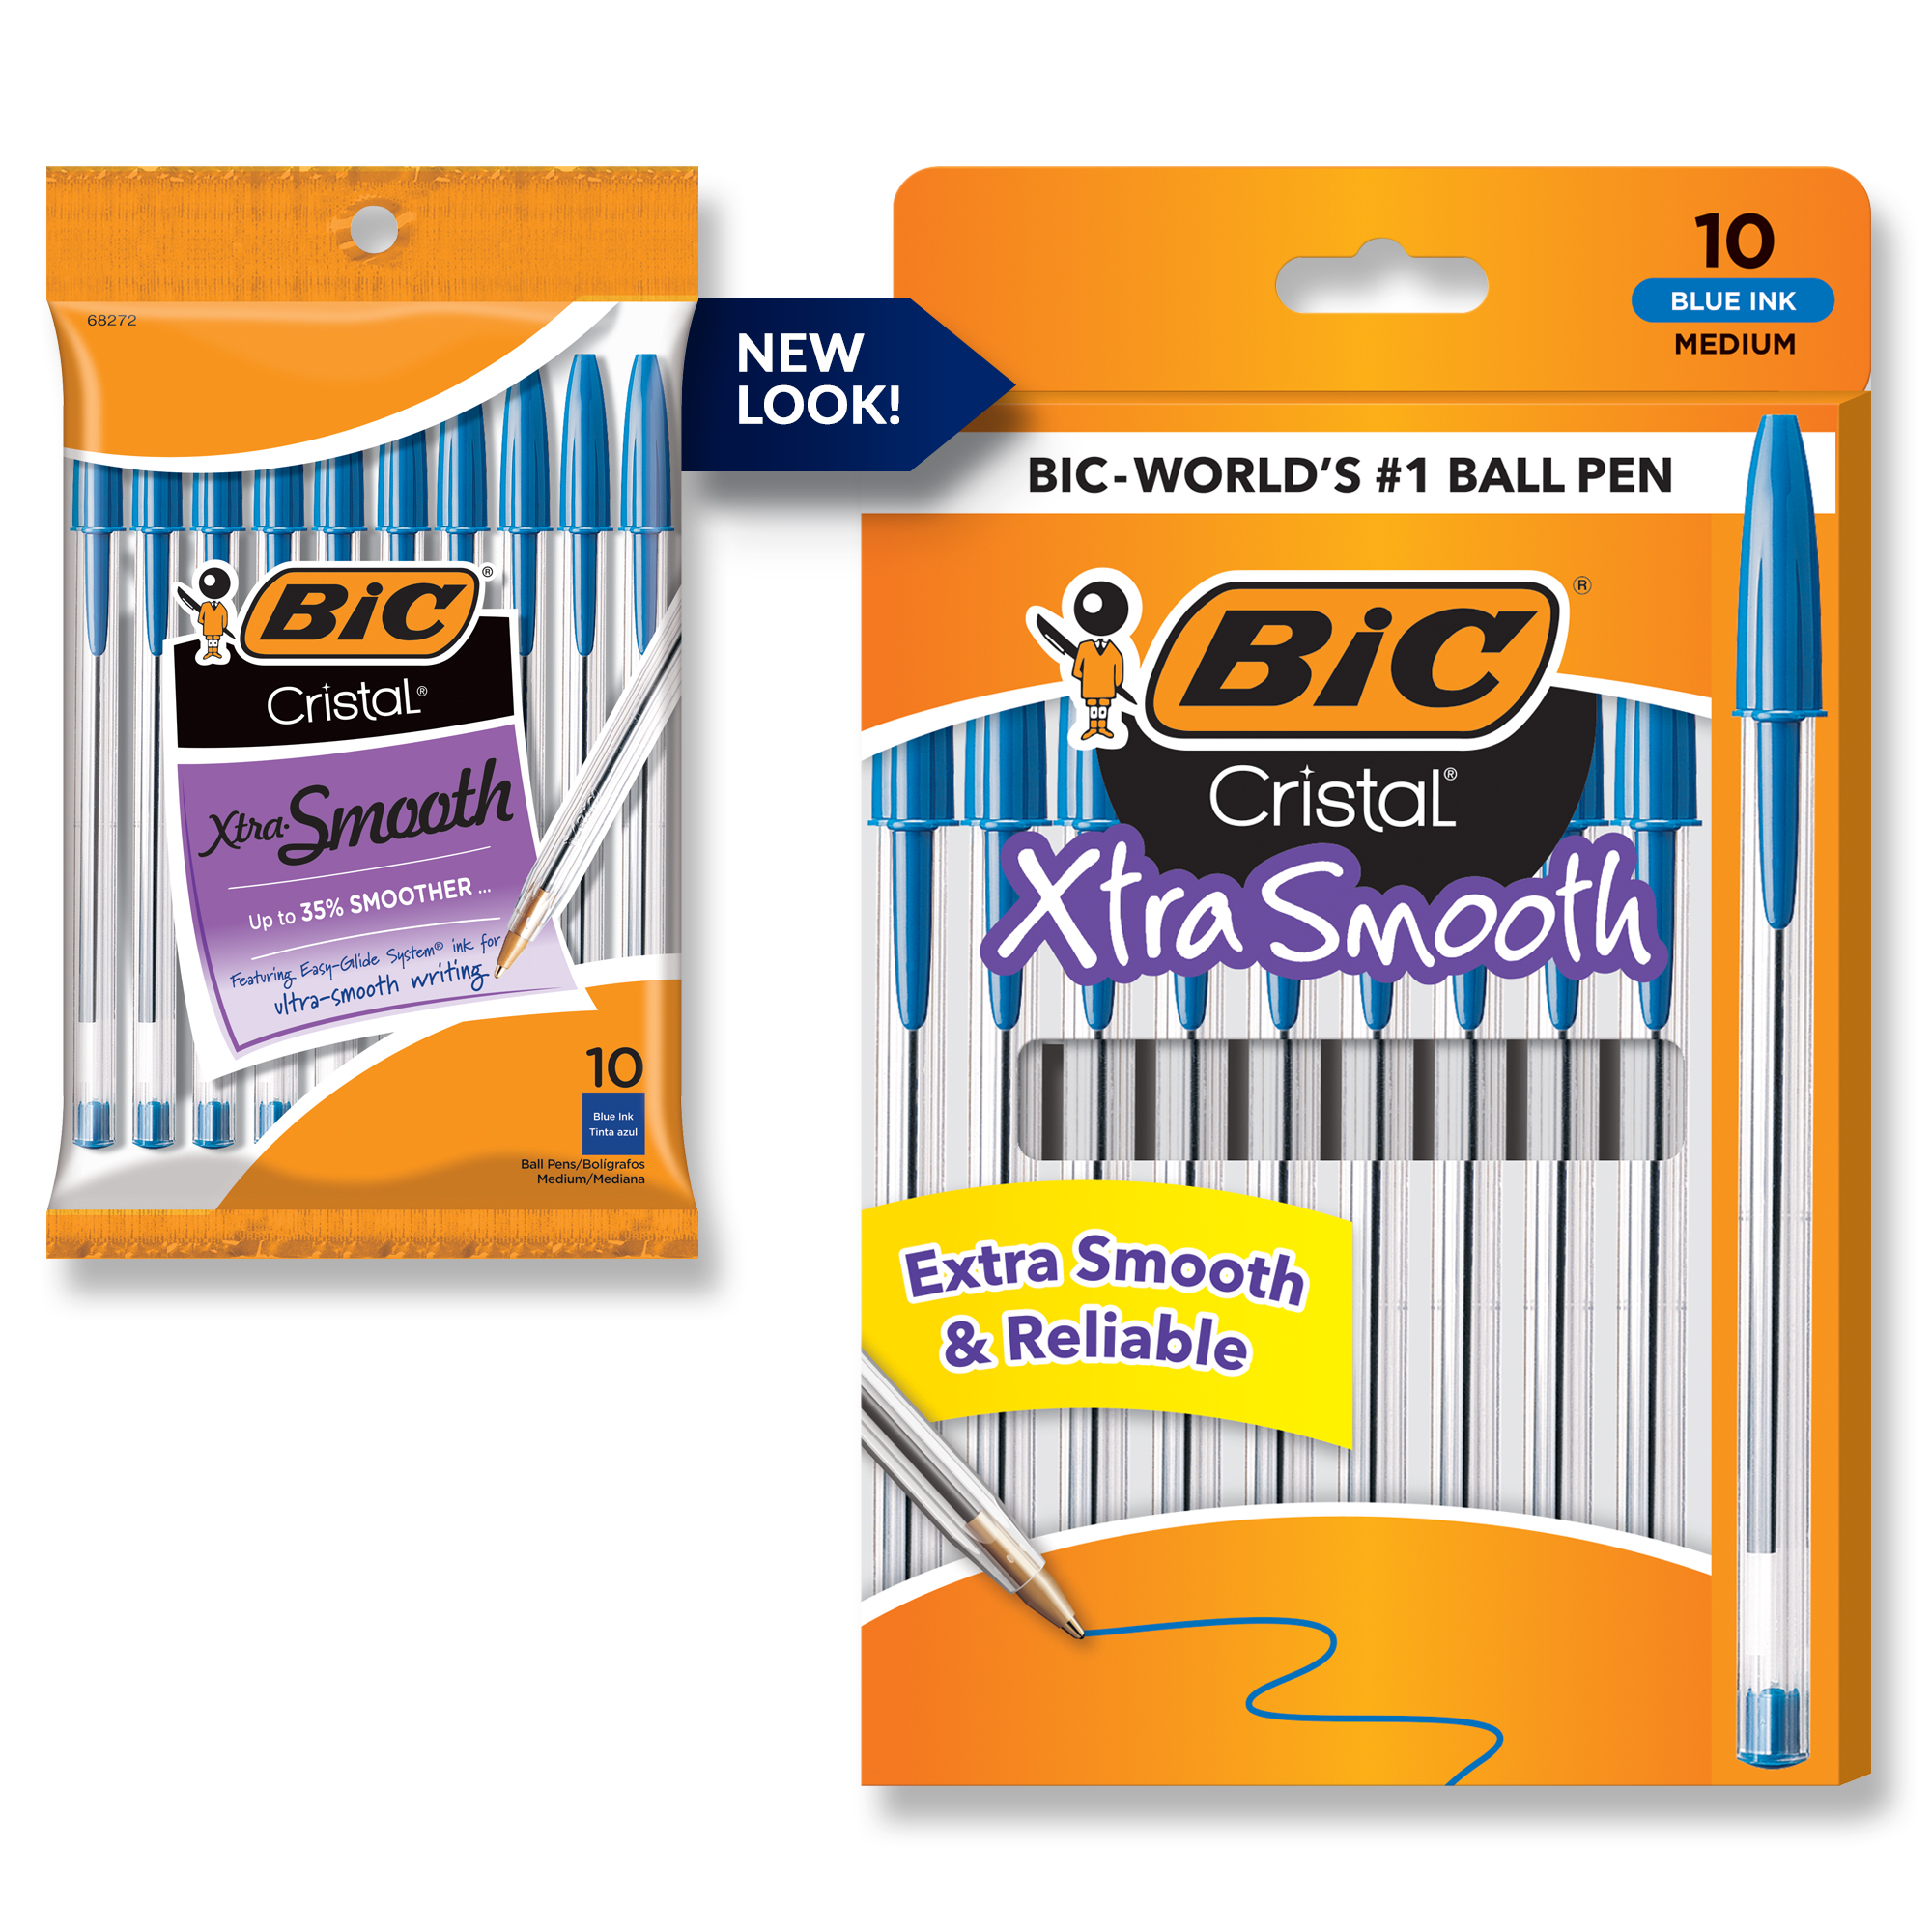 BIC Cristal Xtra Smooth Stic Ball Pens, 1.0 mm, Blue Ink, Pack of 10 - image 5 of 10